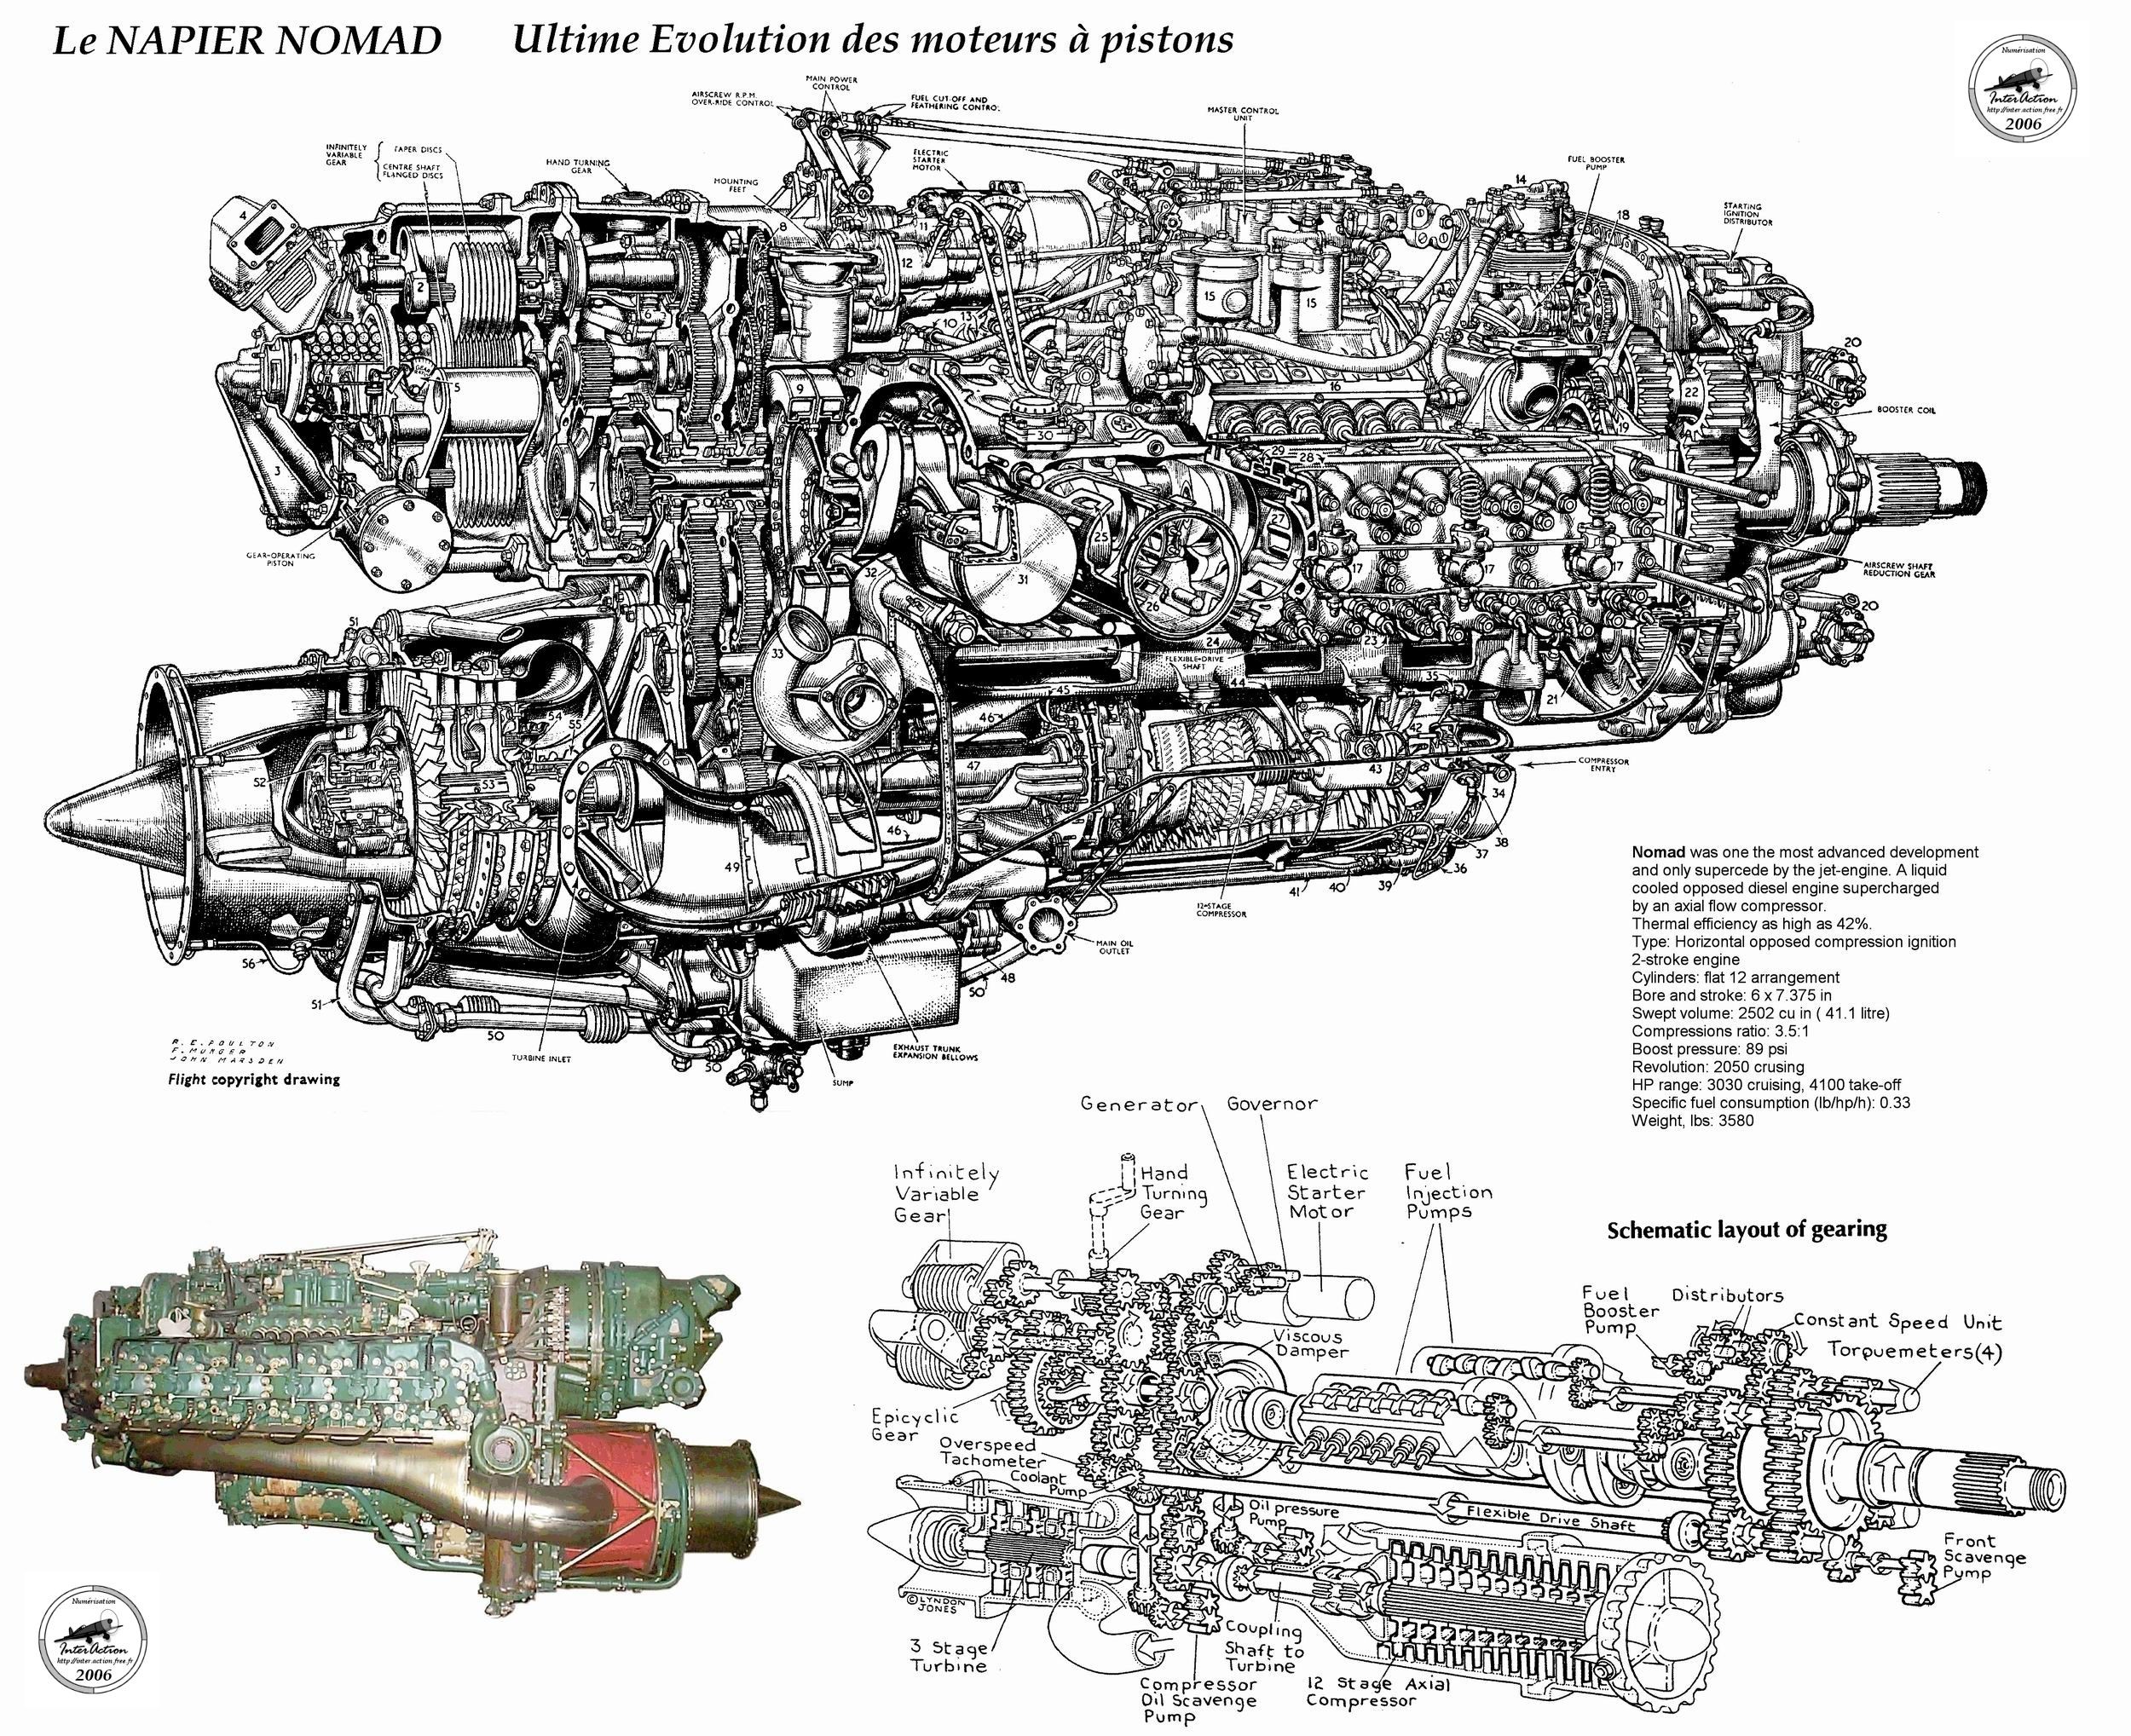 Helicopter Engine Diagram | My Wiring DIagram